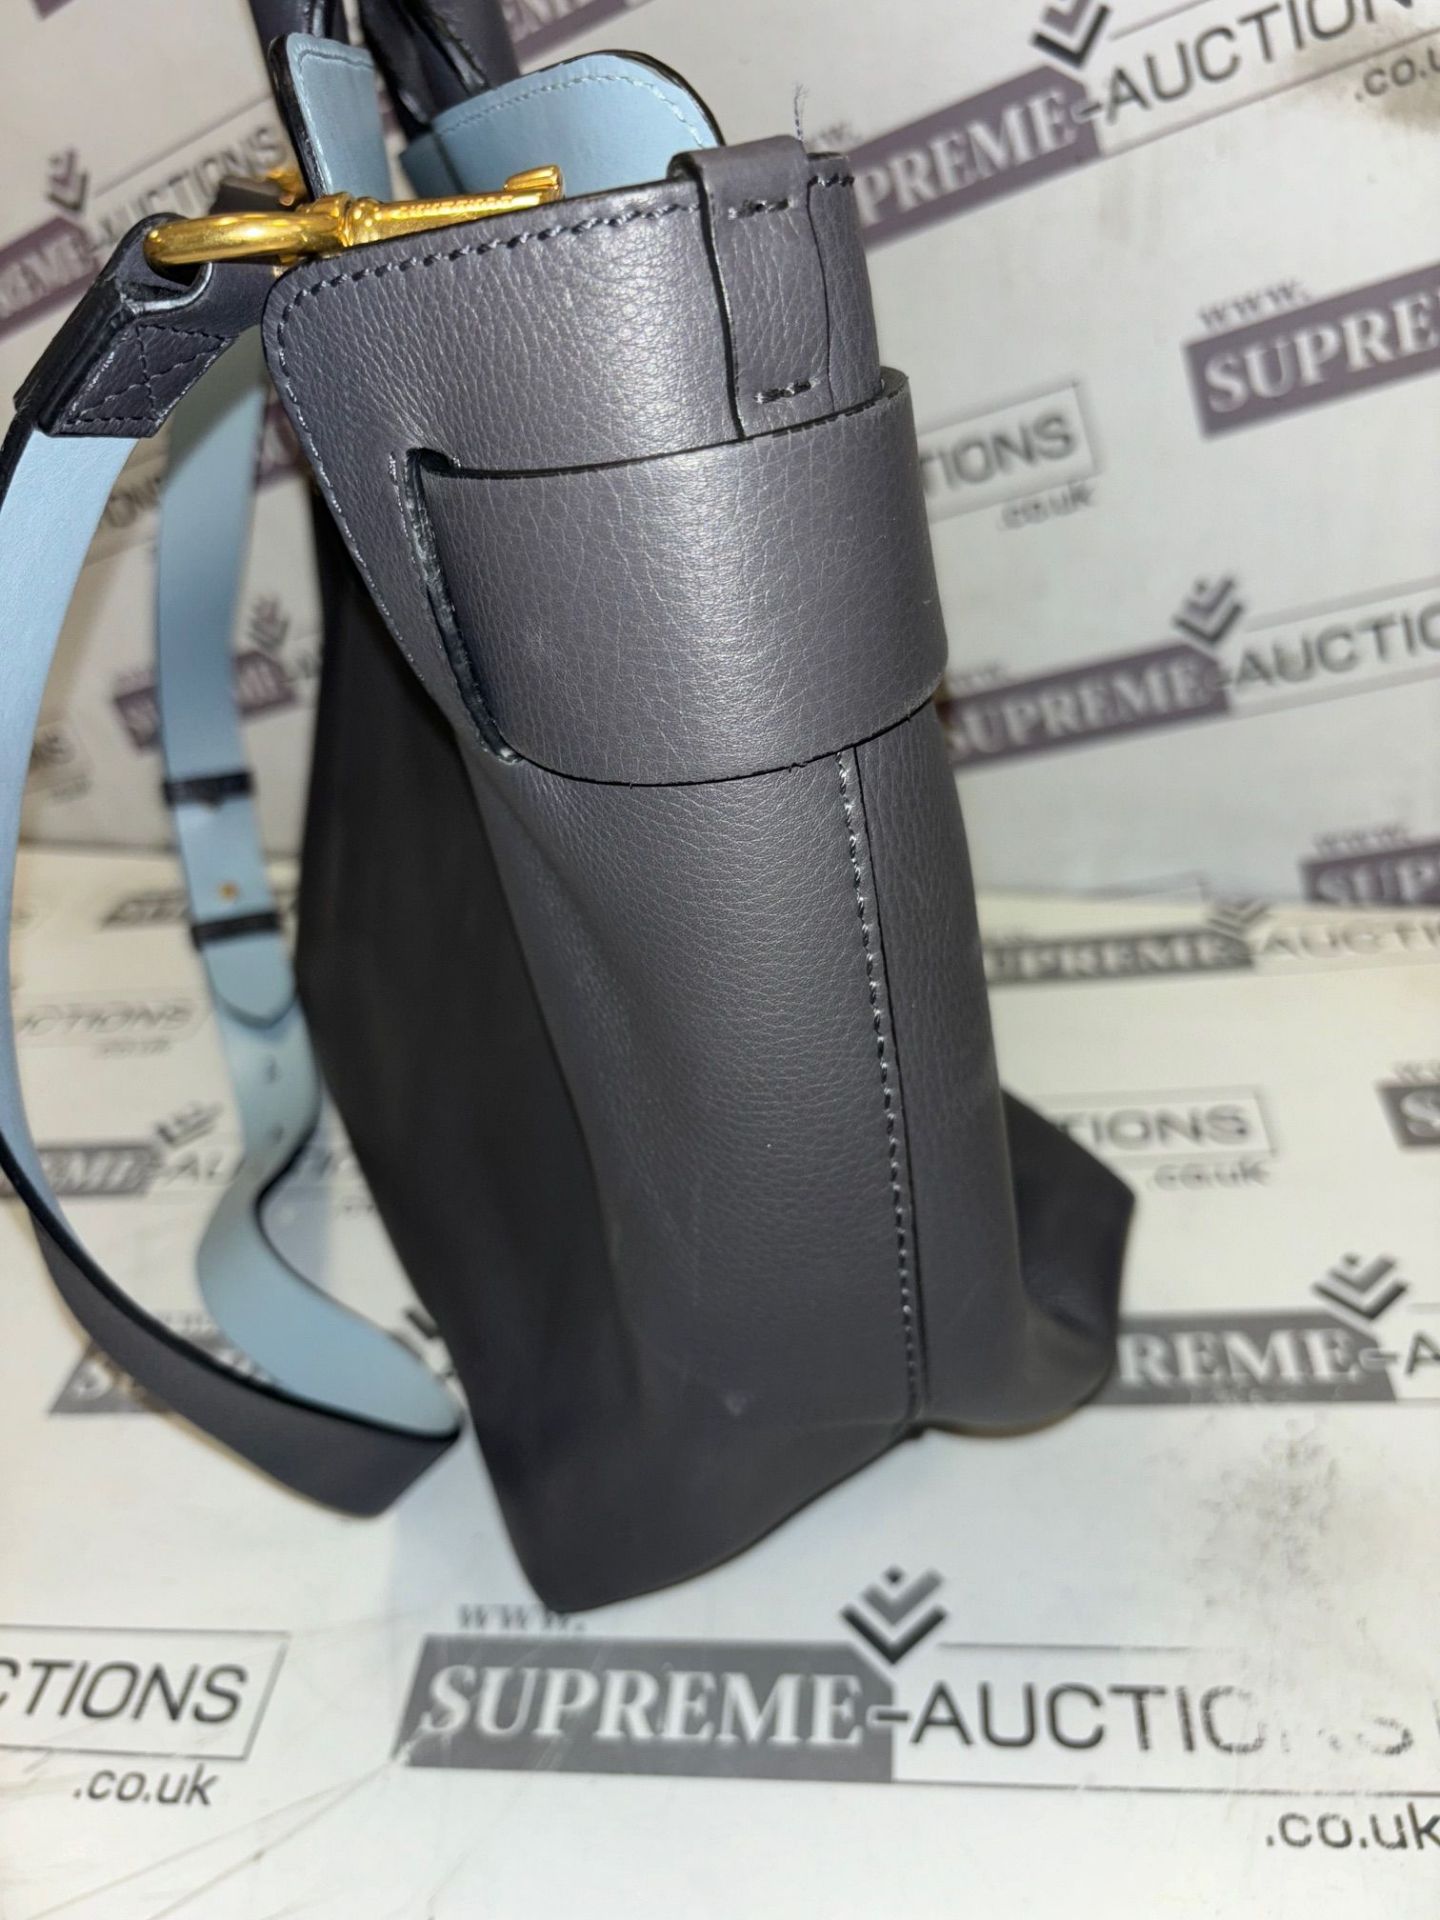 Genuine Burberry The Medium leather Belt Bag. Charcoal grey and baby blue. - Image 7 of 13